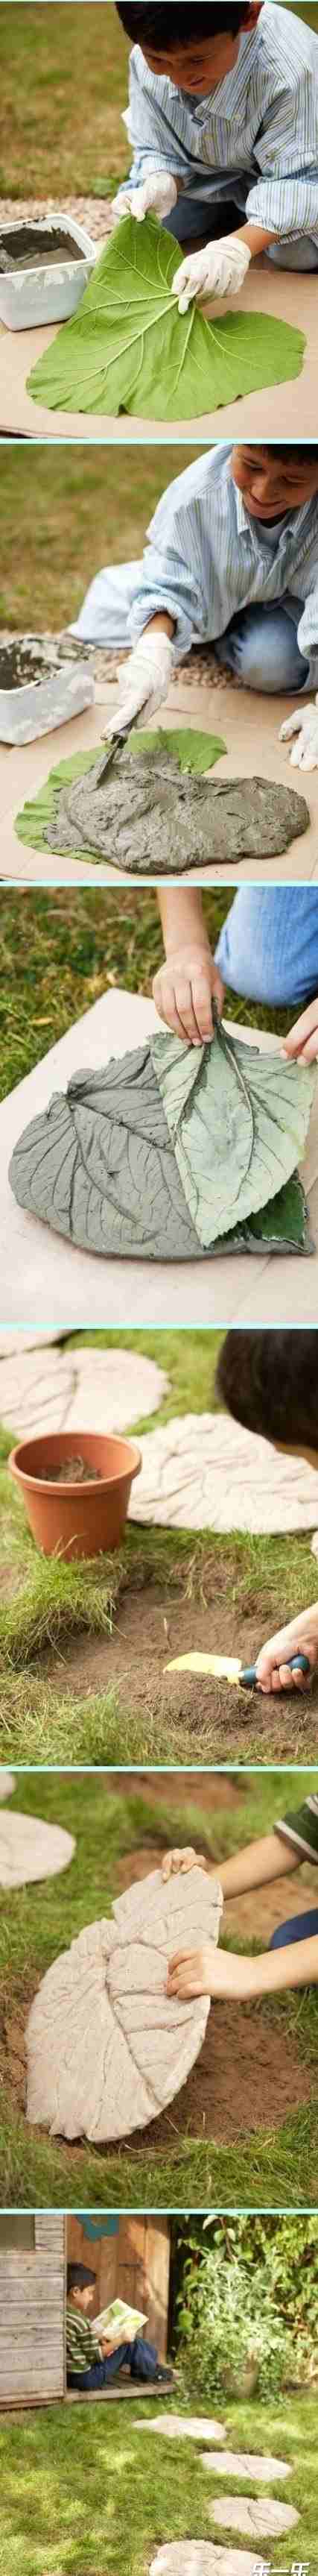 DYI projects ideas rhubarb stepping stones